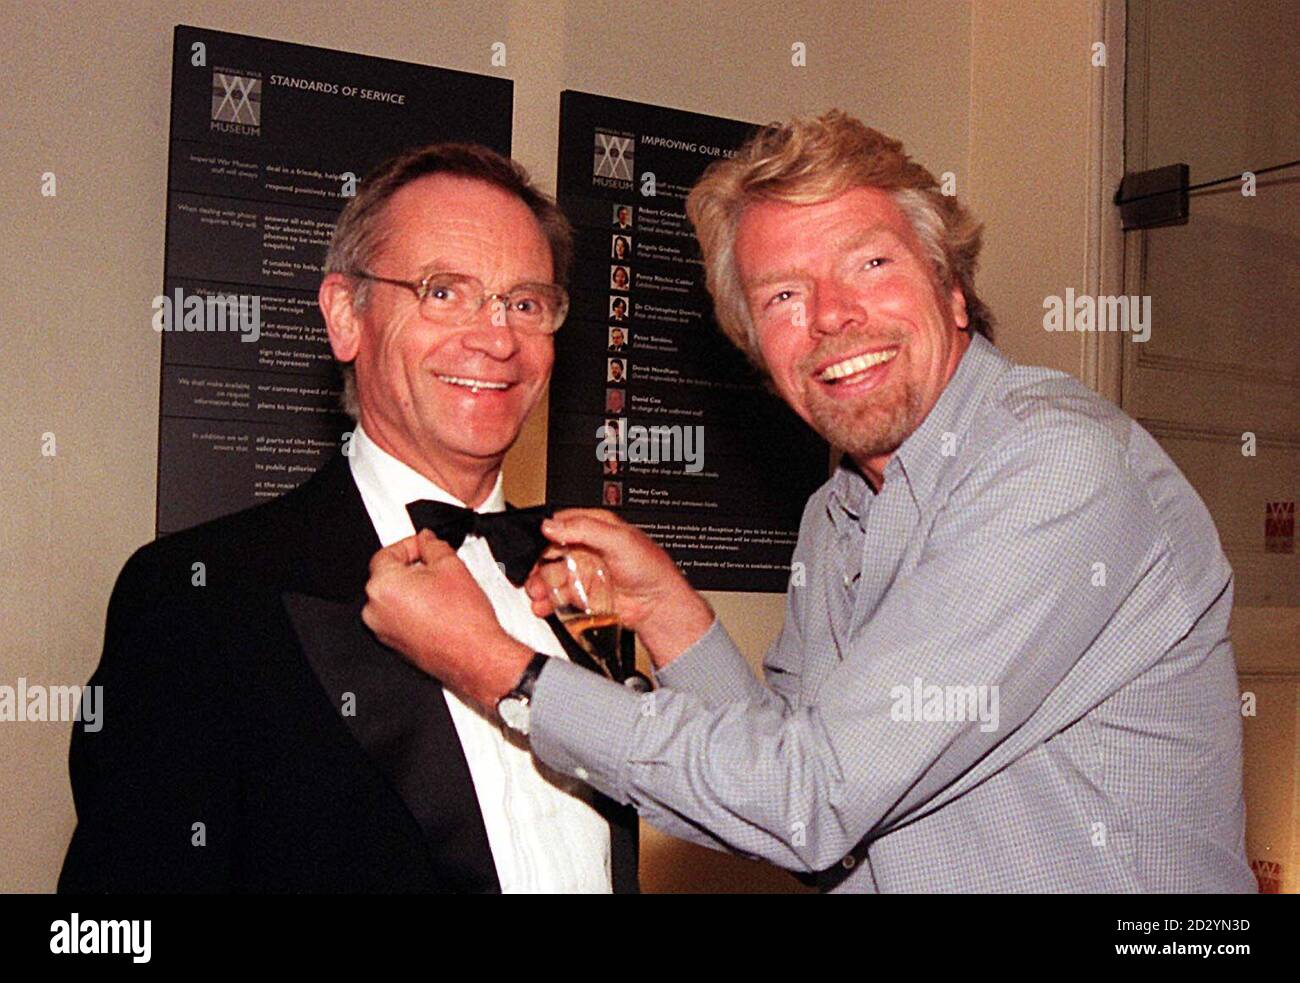 Lord Archer (left) gets the treatment from Virgin boss Richard Branson at  the London Broncos' annual Summer Ball at the Imperial War Museum in London  this evening (Saturday). Photo by Tony Harris/PA>